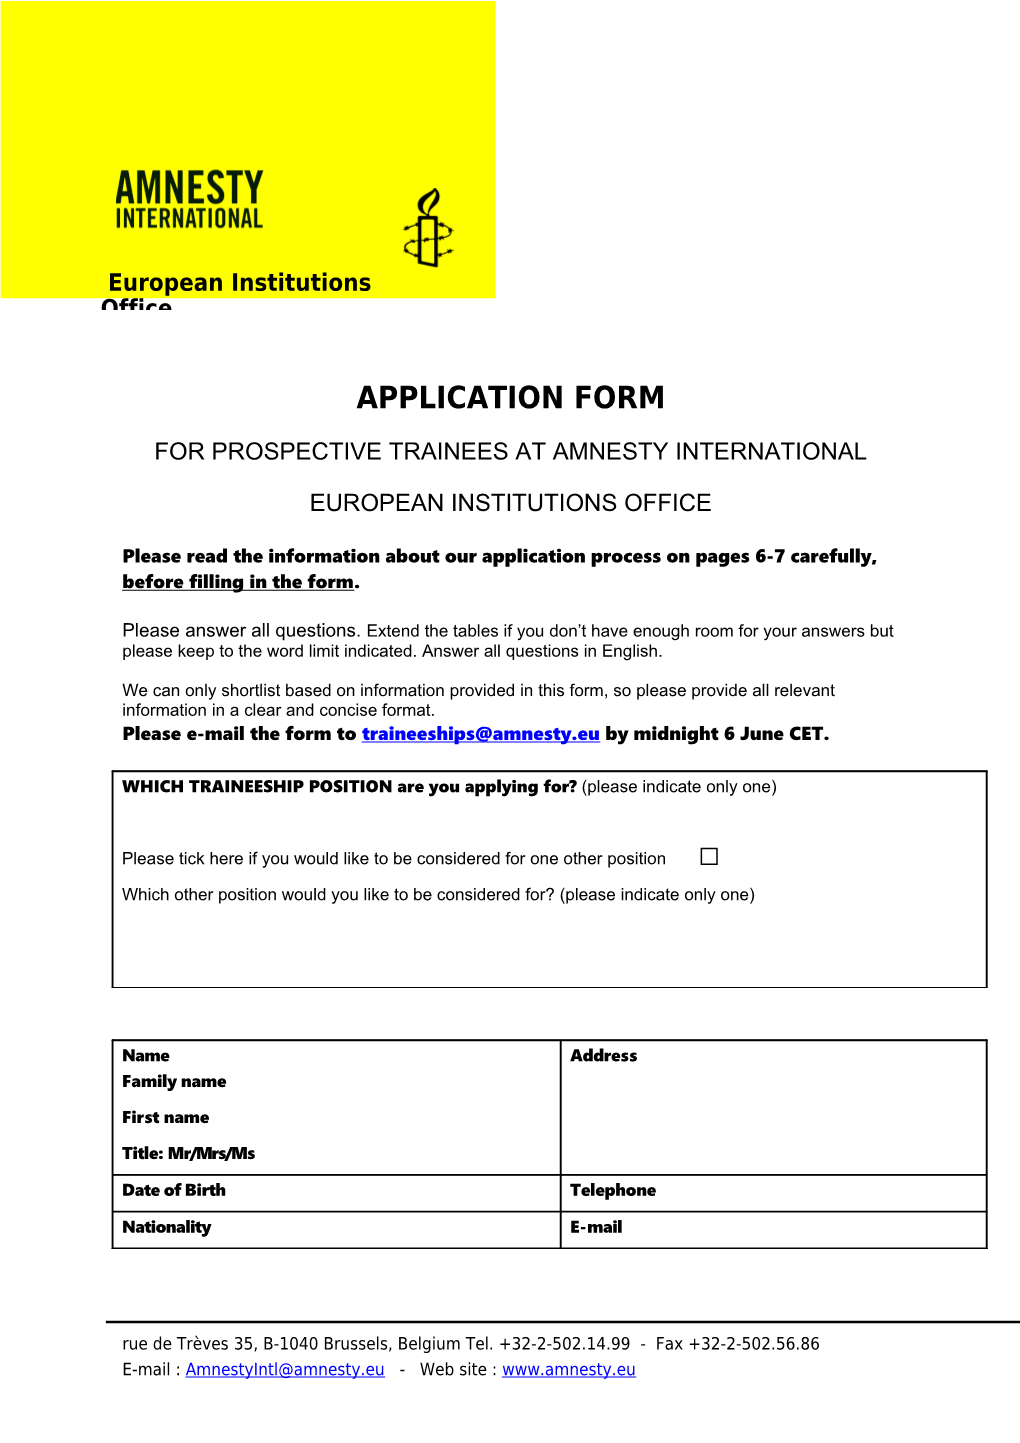 For Prospective Trainees at Amnesty International